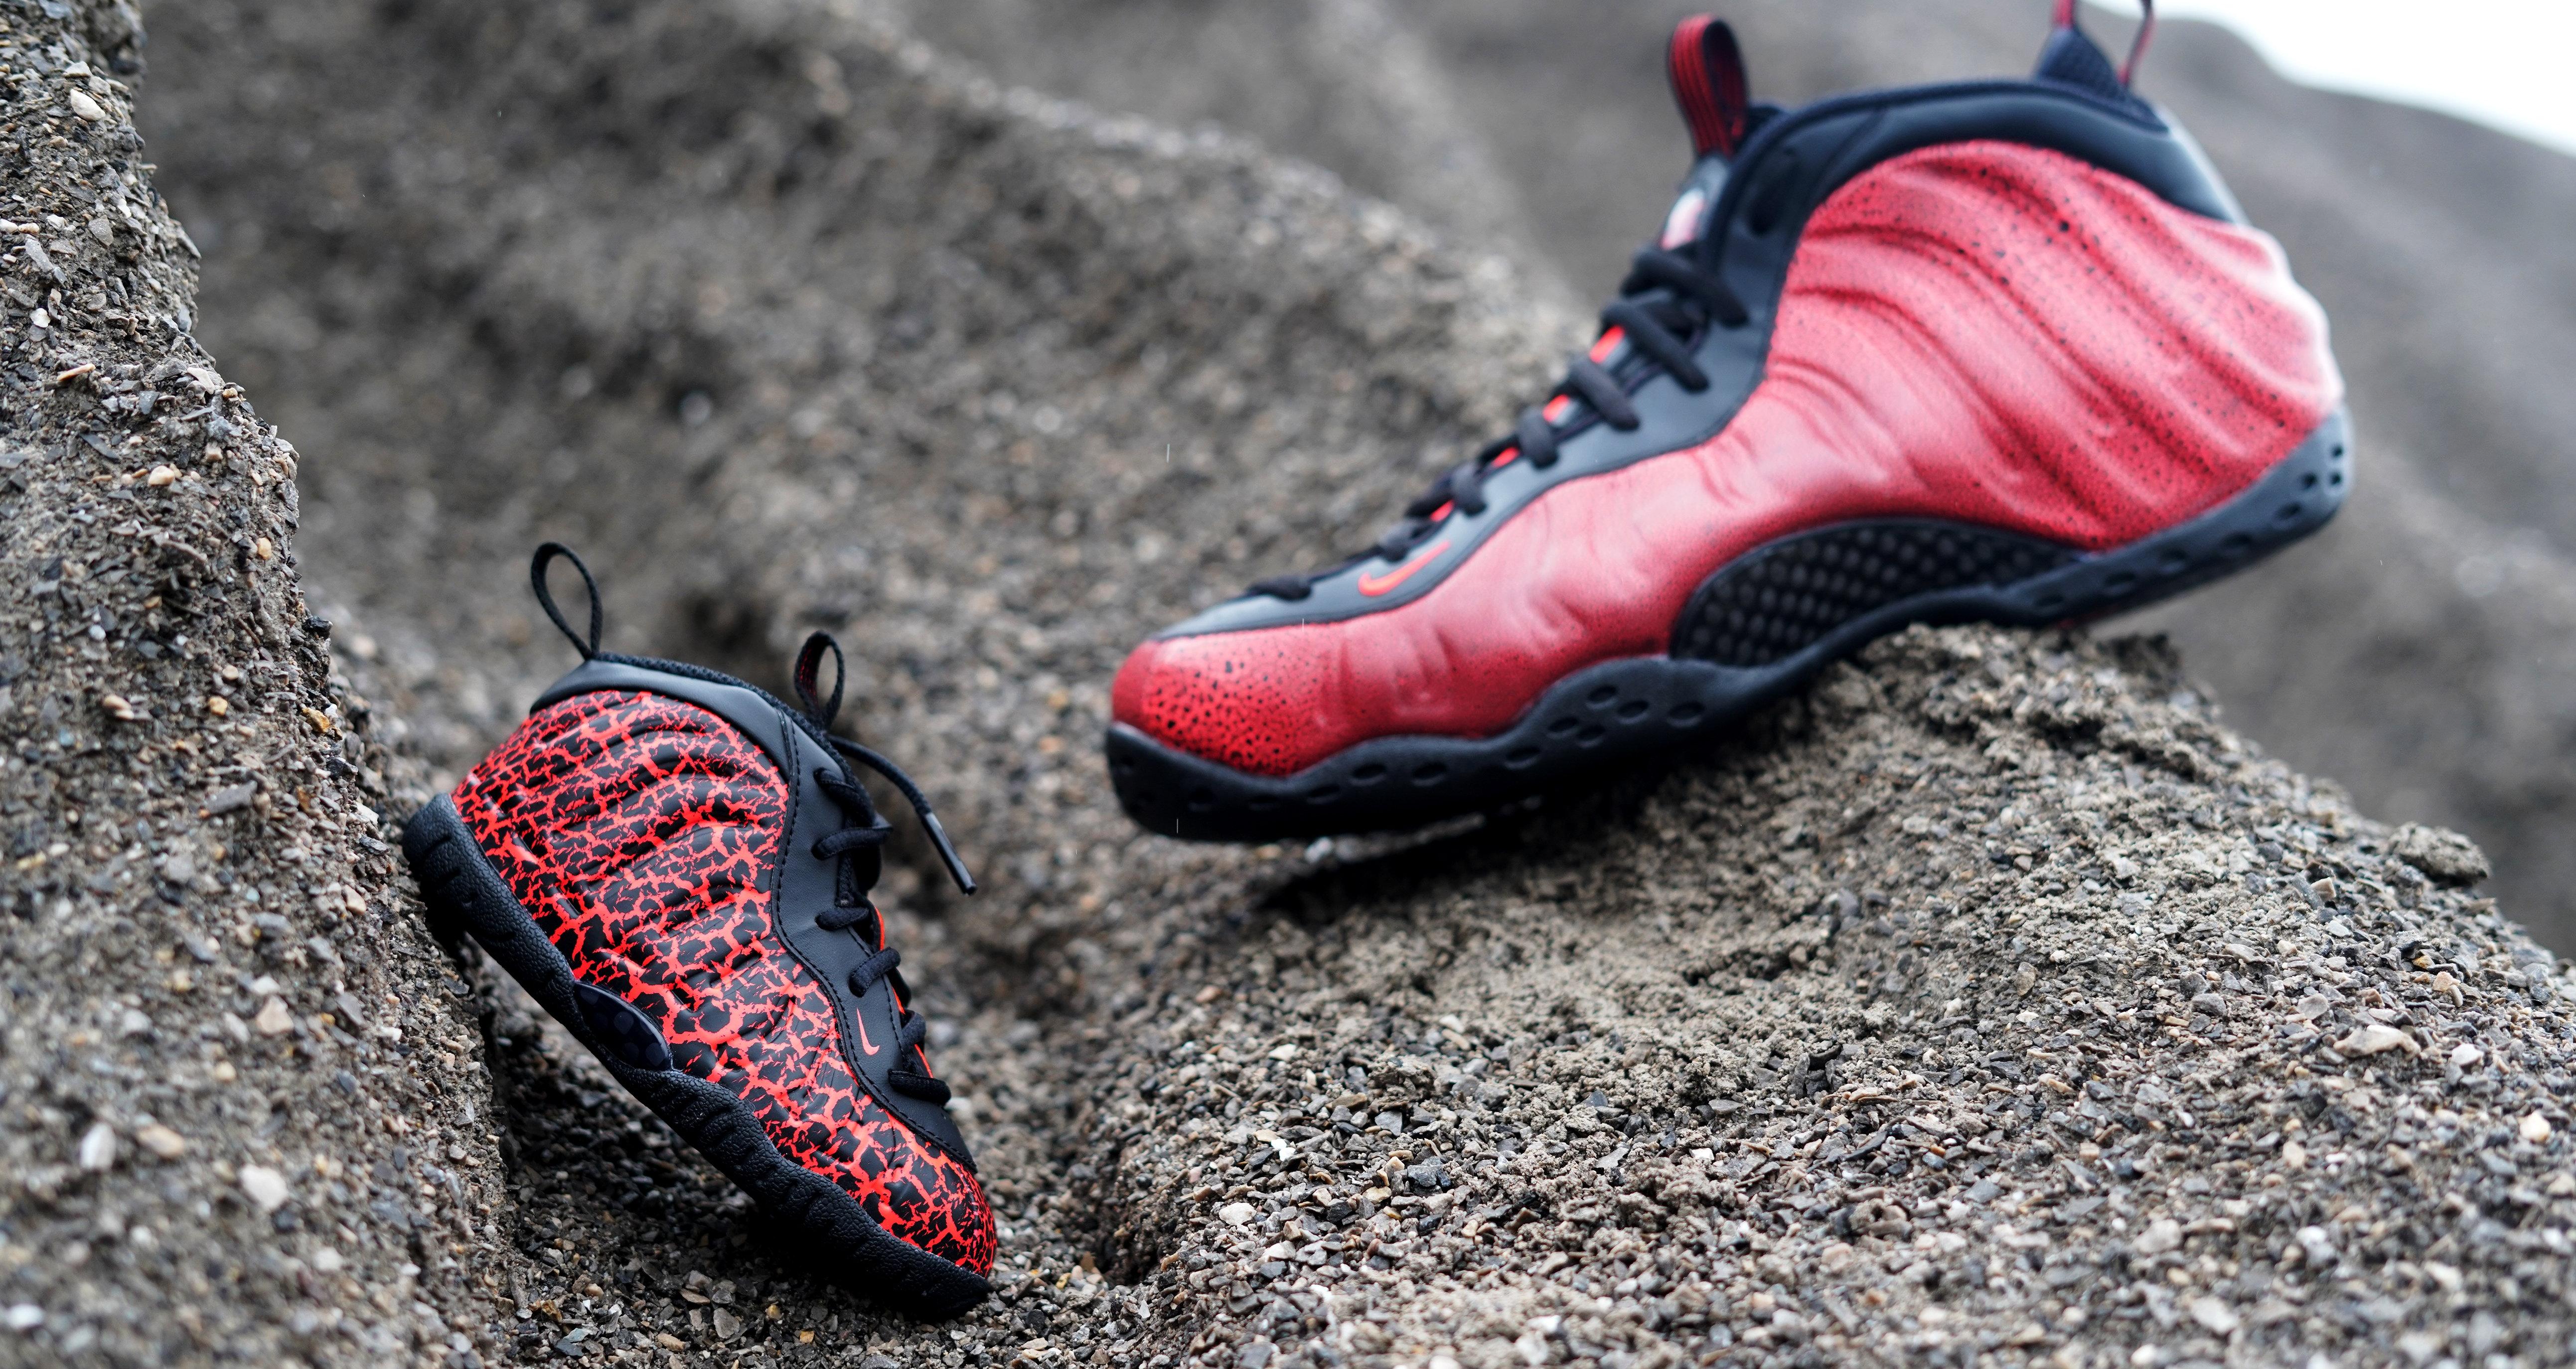 Sneakers – Nike Air Foamposite 1 and Little Posite One &#8220;Cracked Lava&#8221; Black/Bright Crimson